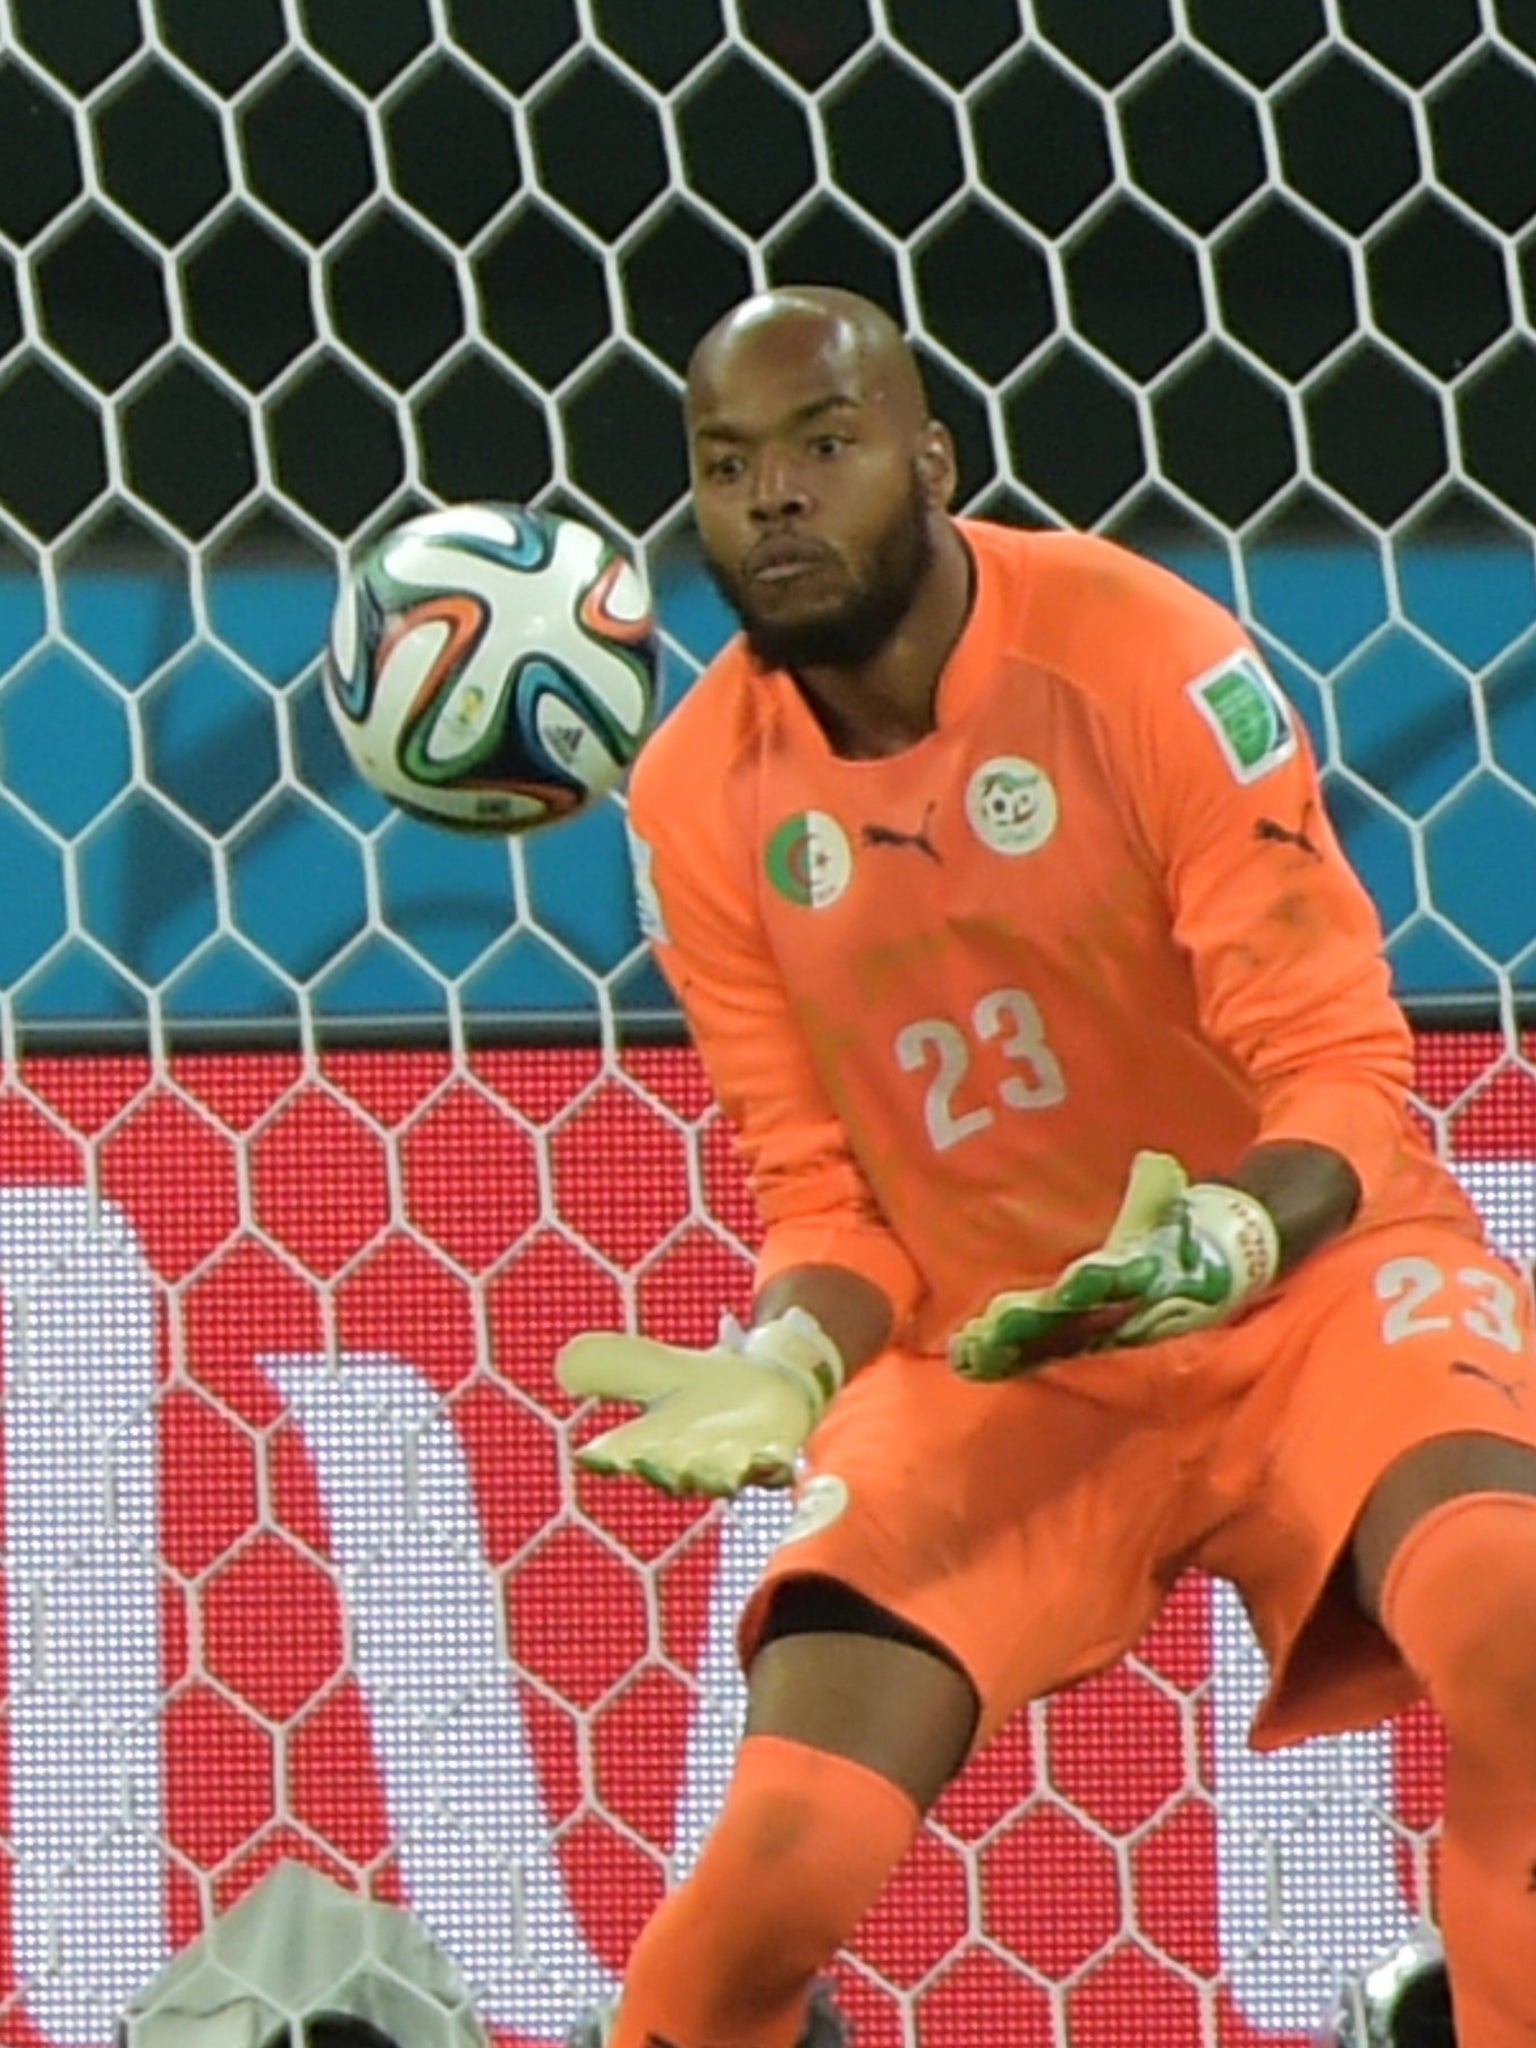 Raïs M’Bolhi, of Algeria, made his mark at the World Cup and is likely to be the best goalkeeper at the African Cup of Nations